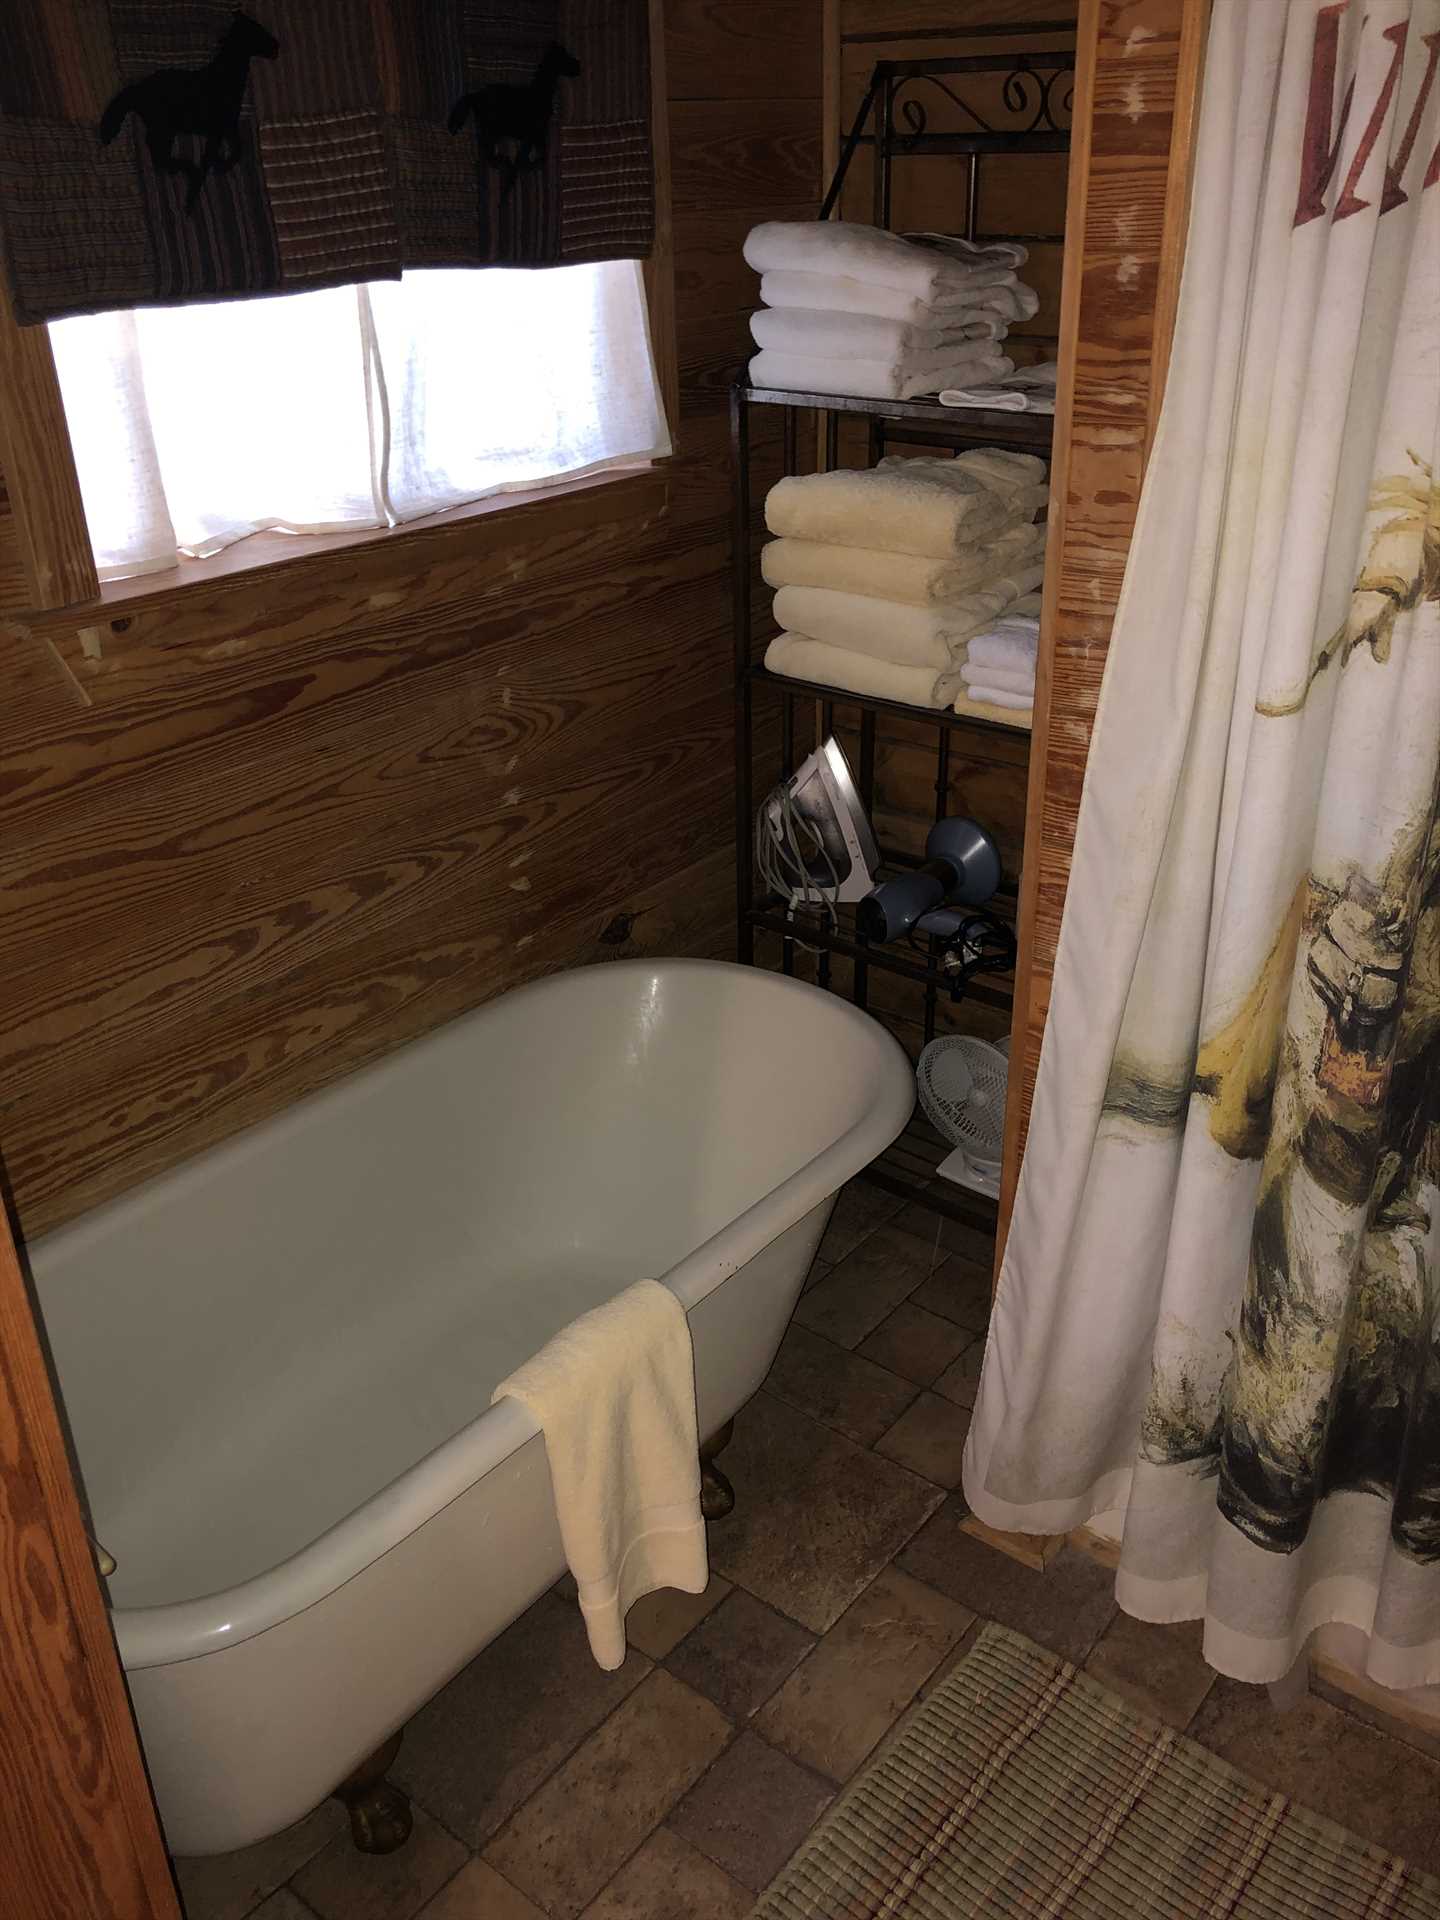                                                 You'll have your pick of a classic clawfoot tub and a shower-and plenty of clean bath and bed linens!